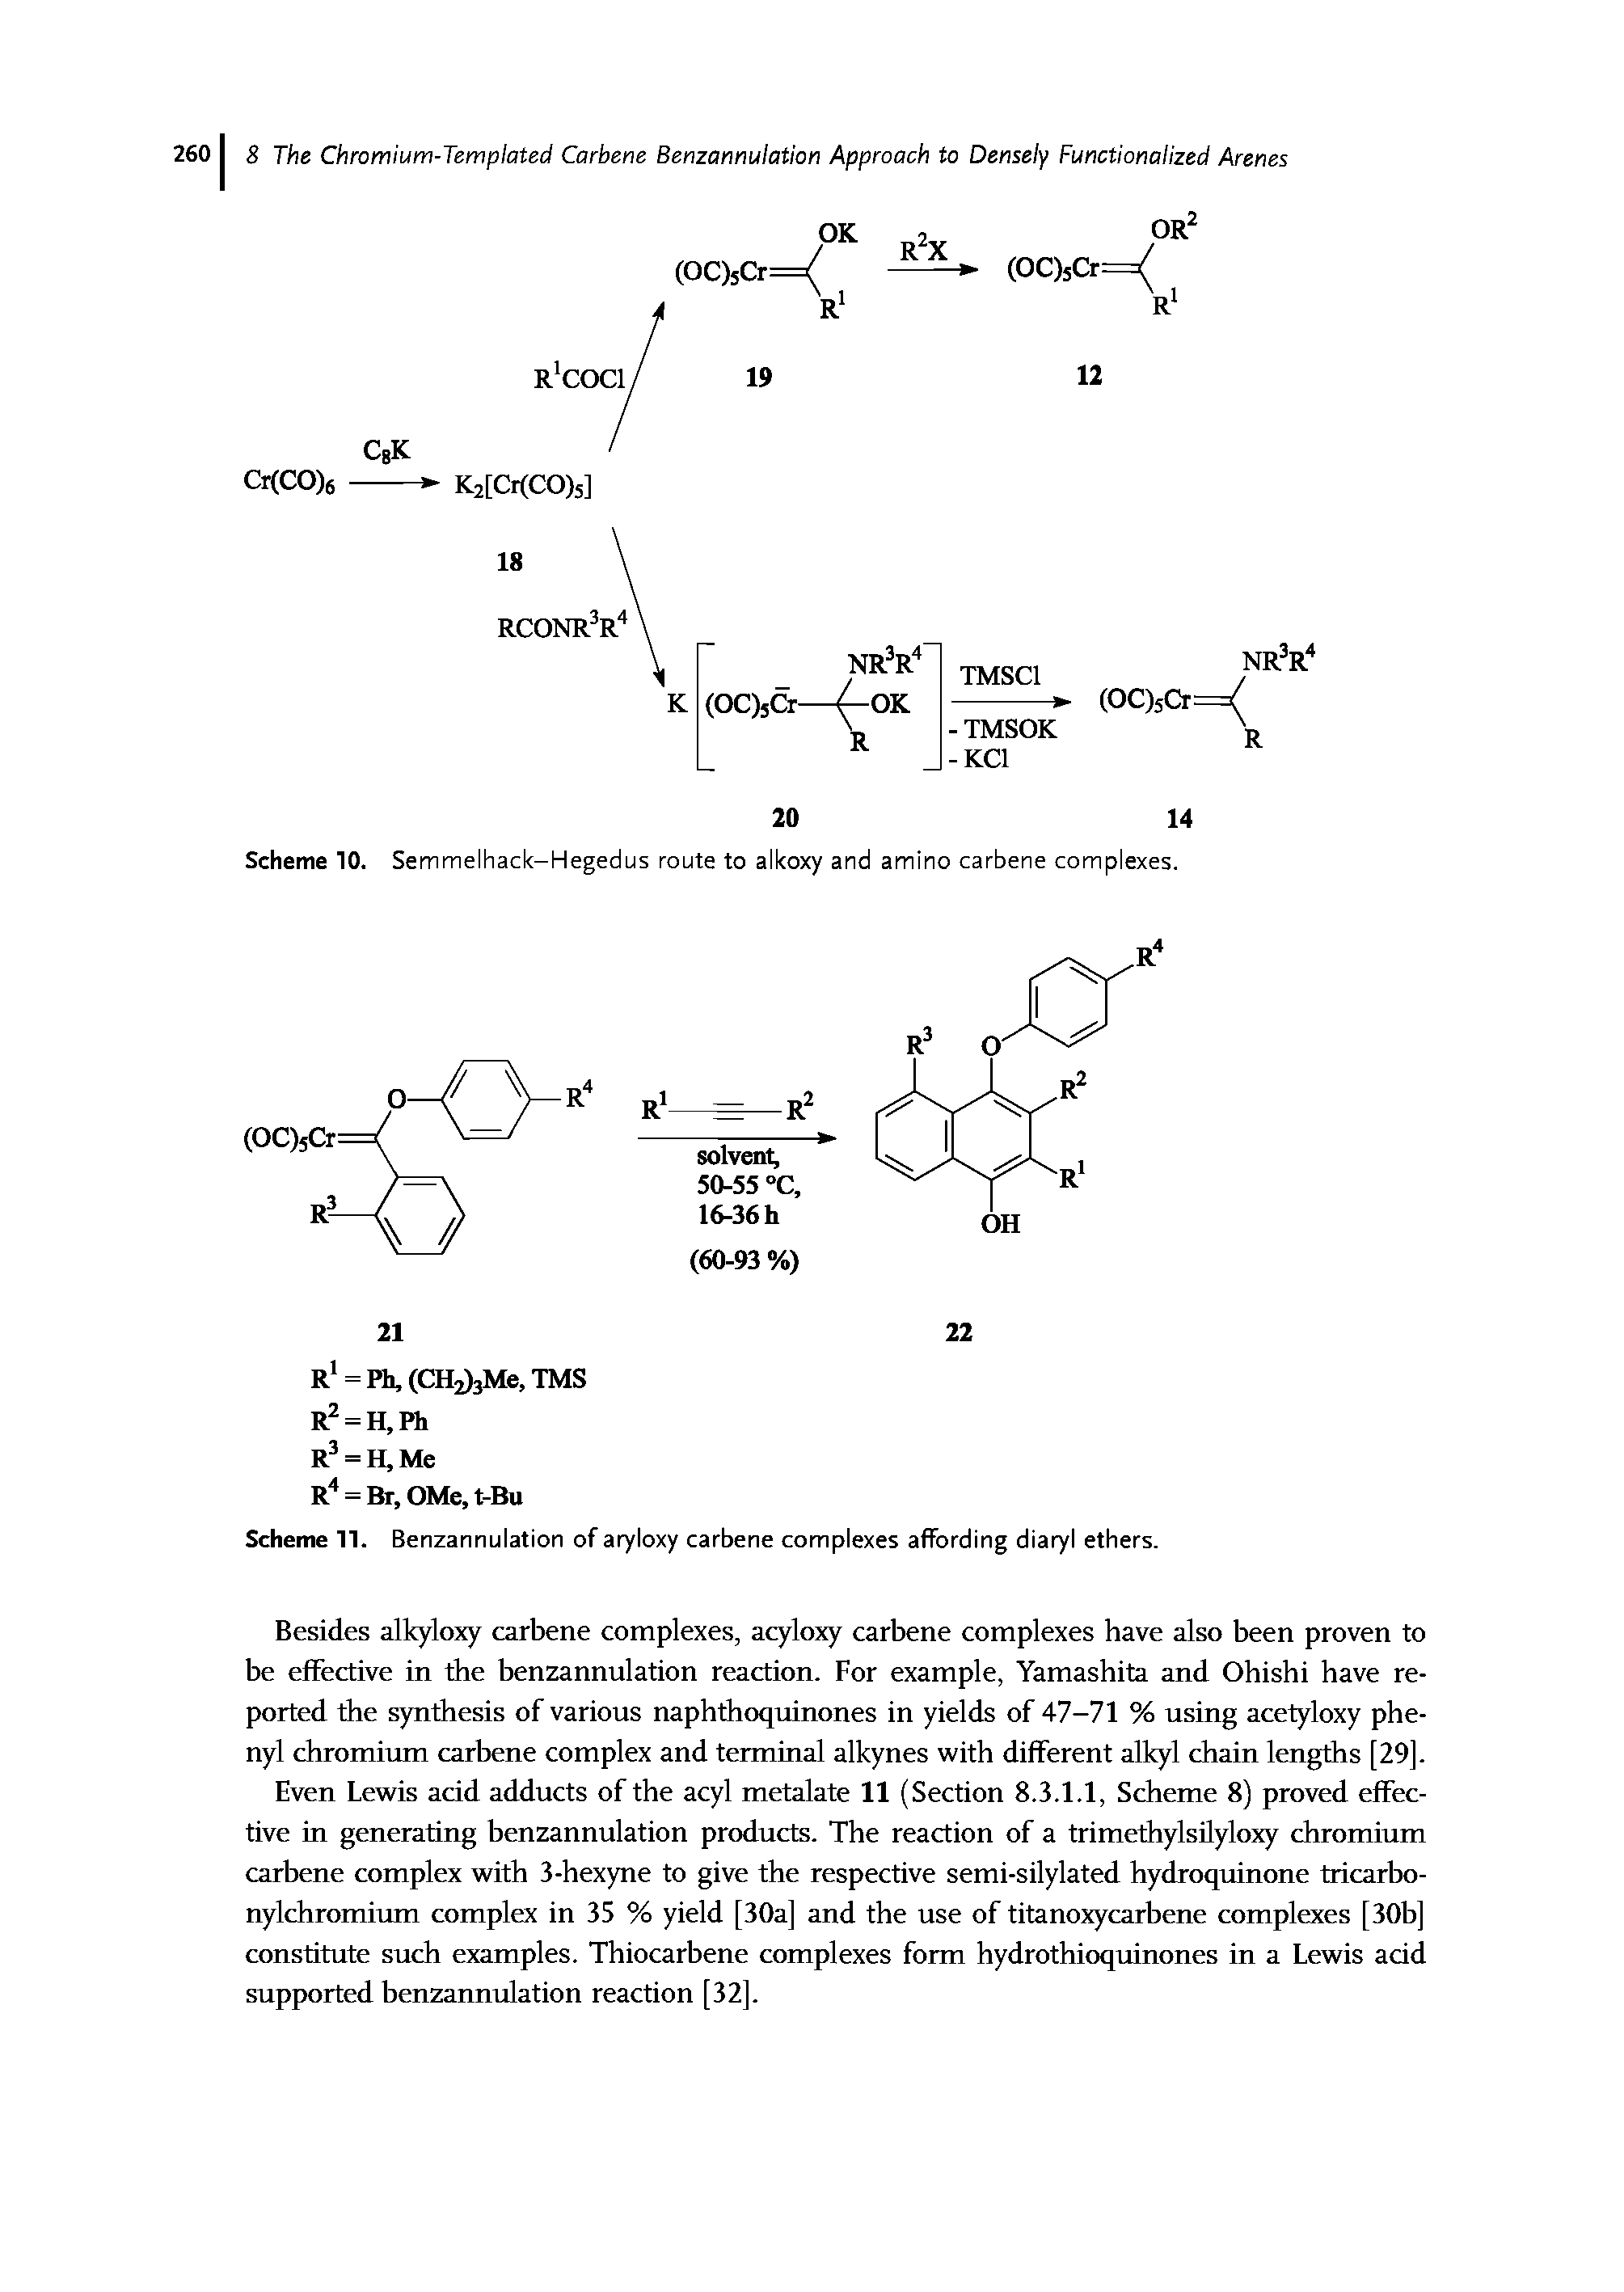 Scheme 11. Benzannulation of aryloxy carbene complexes affording diaryl ethers.